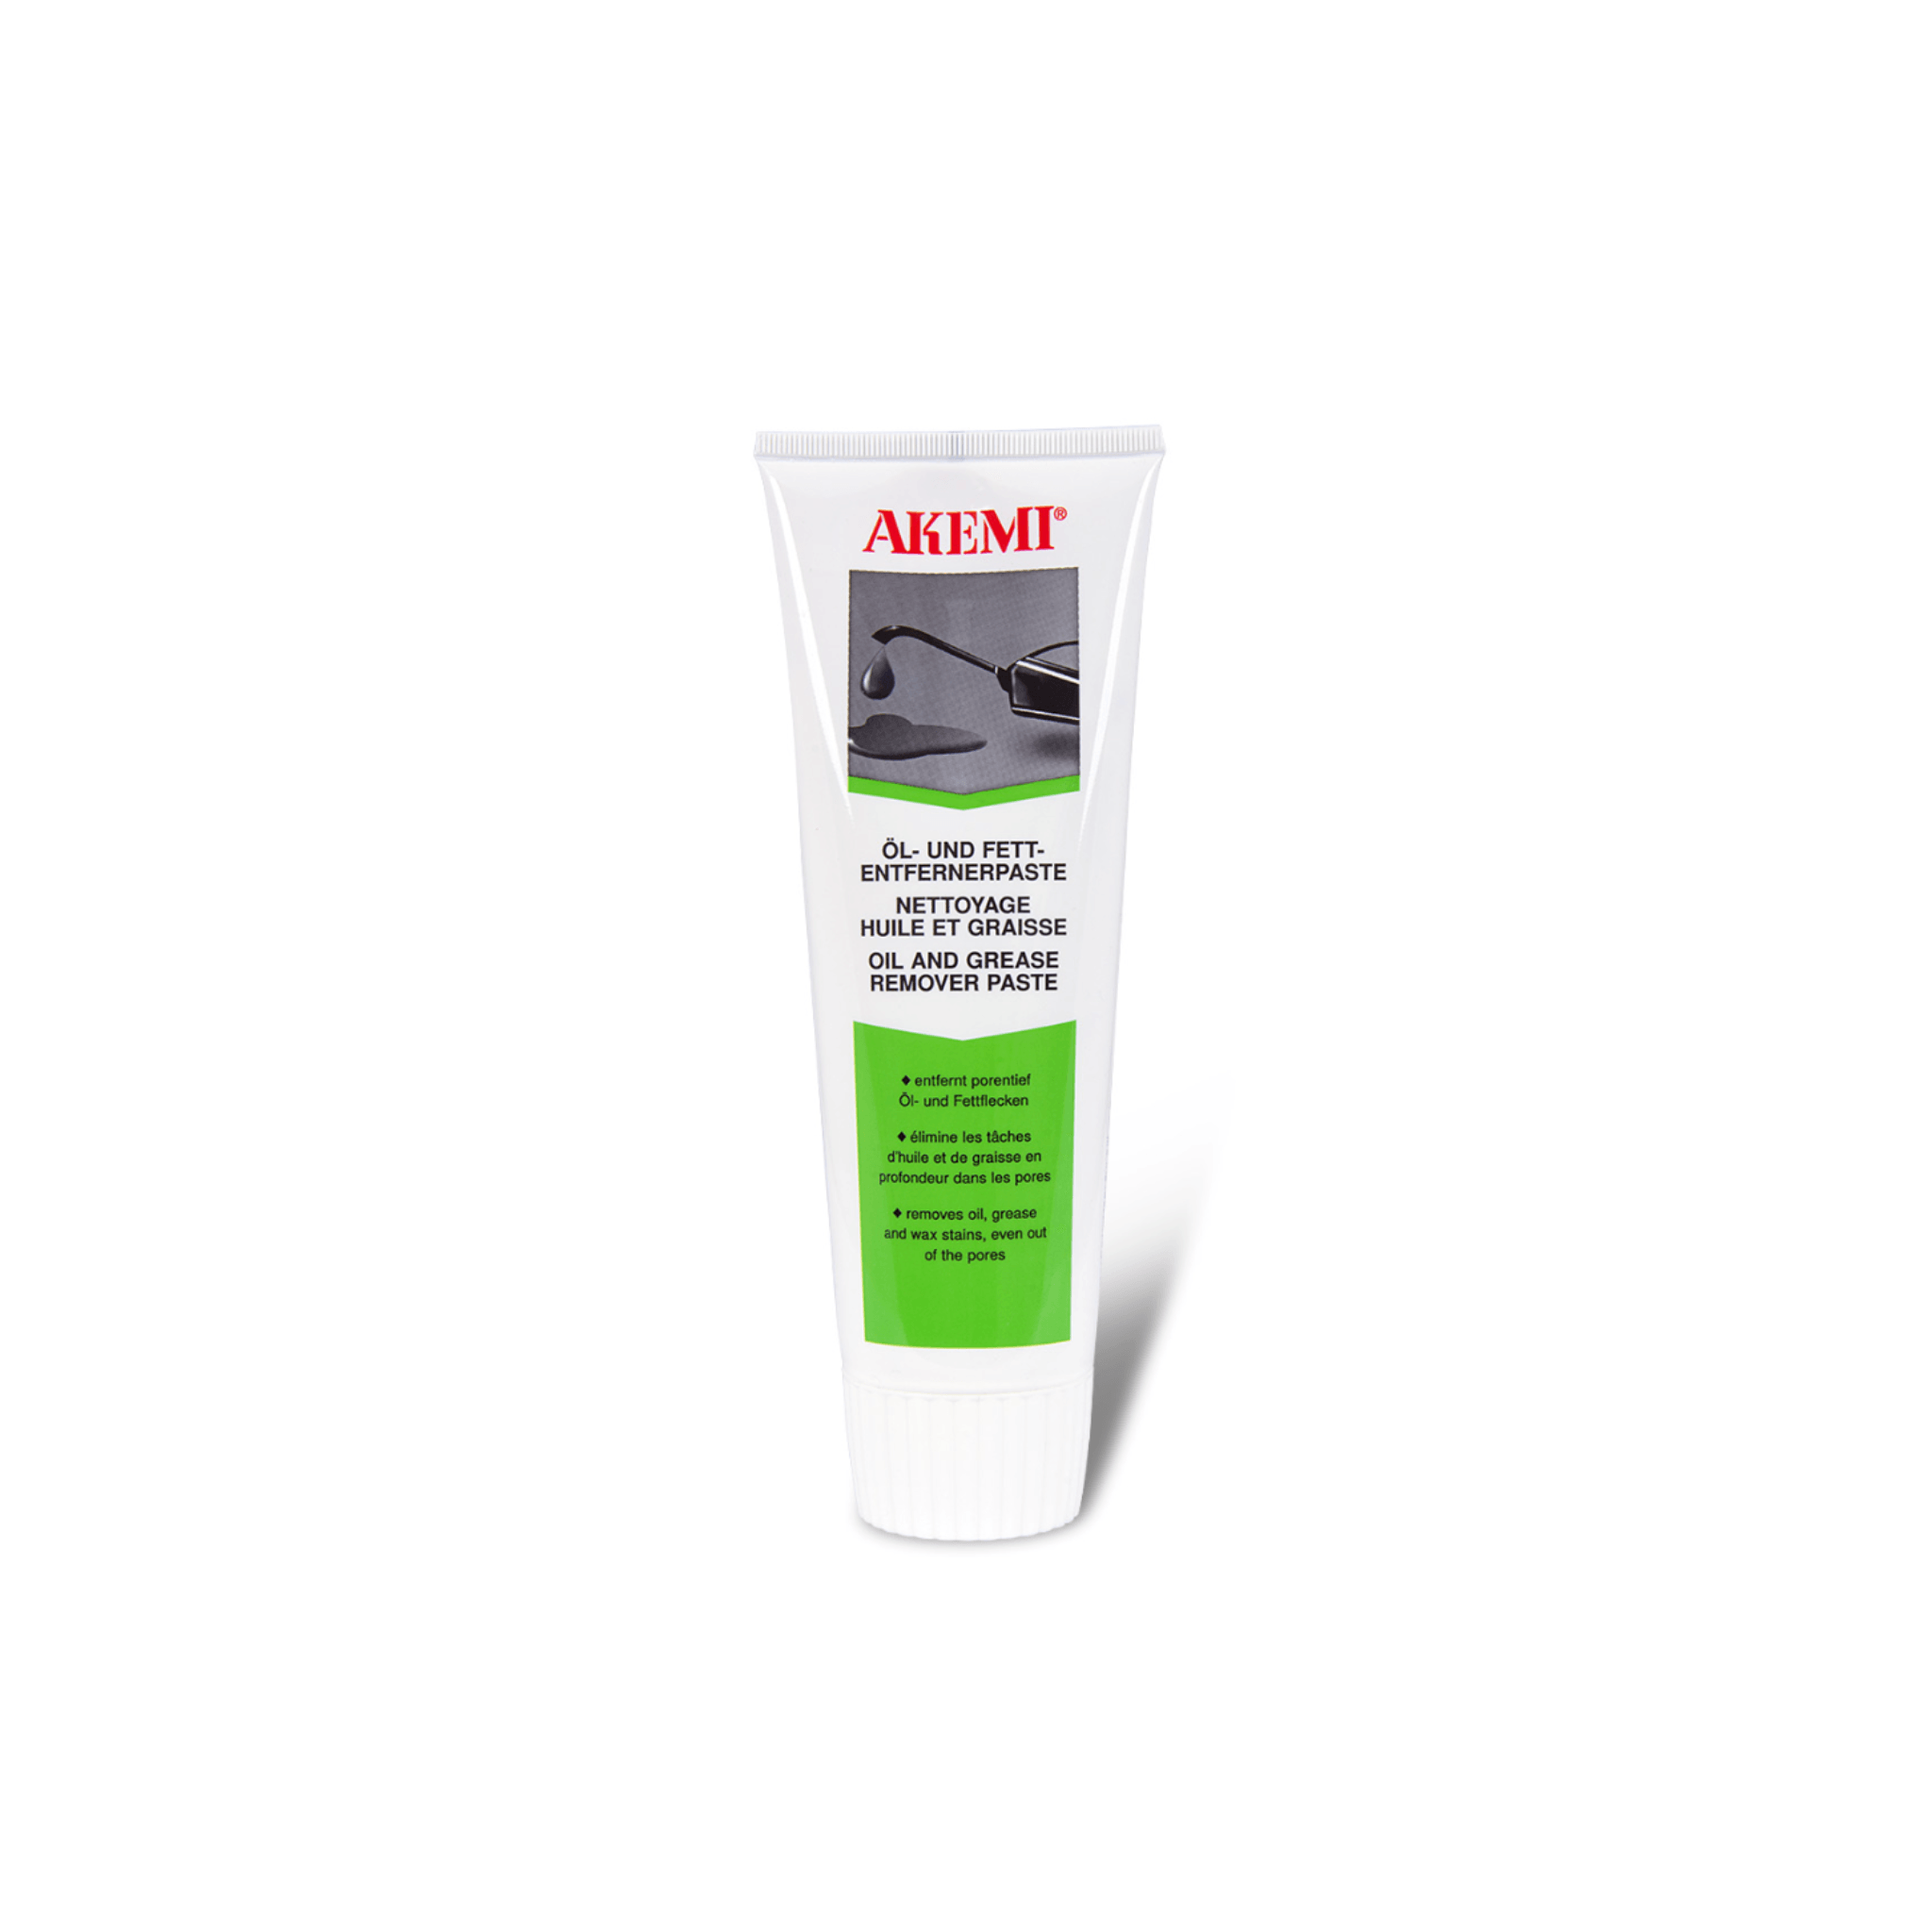 Akemi Oil and Grease Remover Paste - Direct Stone Tool Supply, Inc